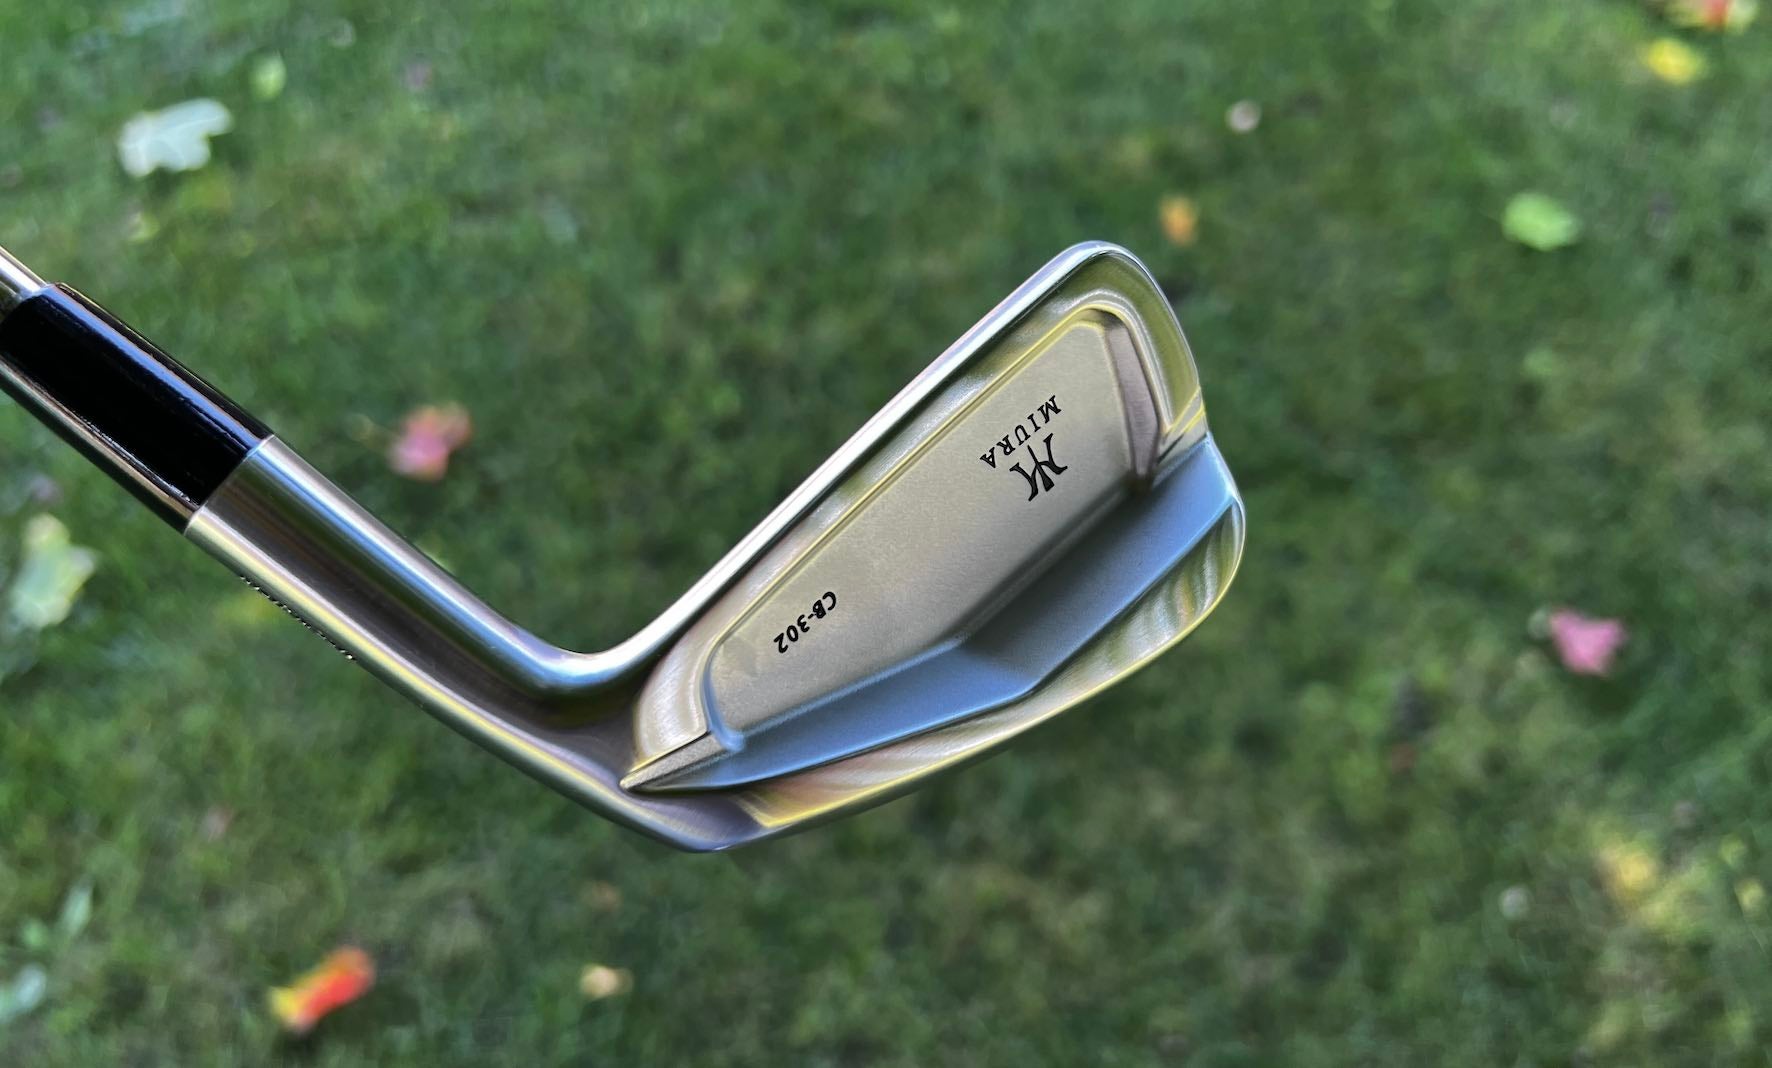 Can forged irons be forgiving? We test Miura's CB 302s | Proving Ground